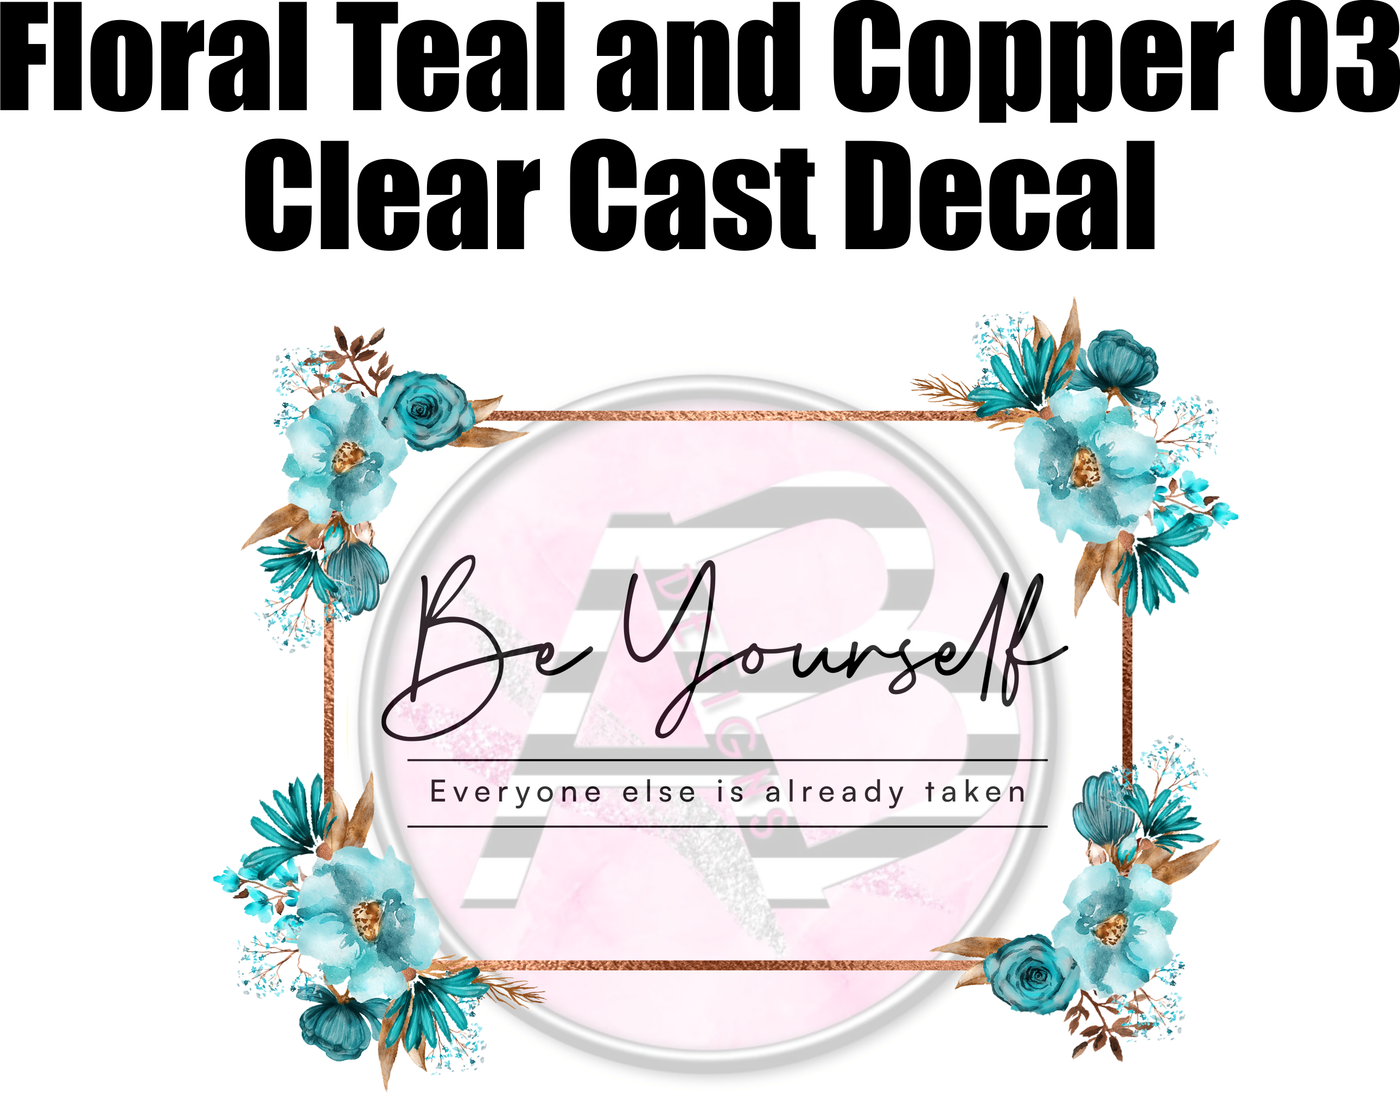 Floral Teal and Copper 03 - Clear Cast Decal